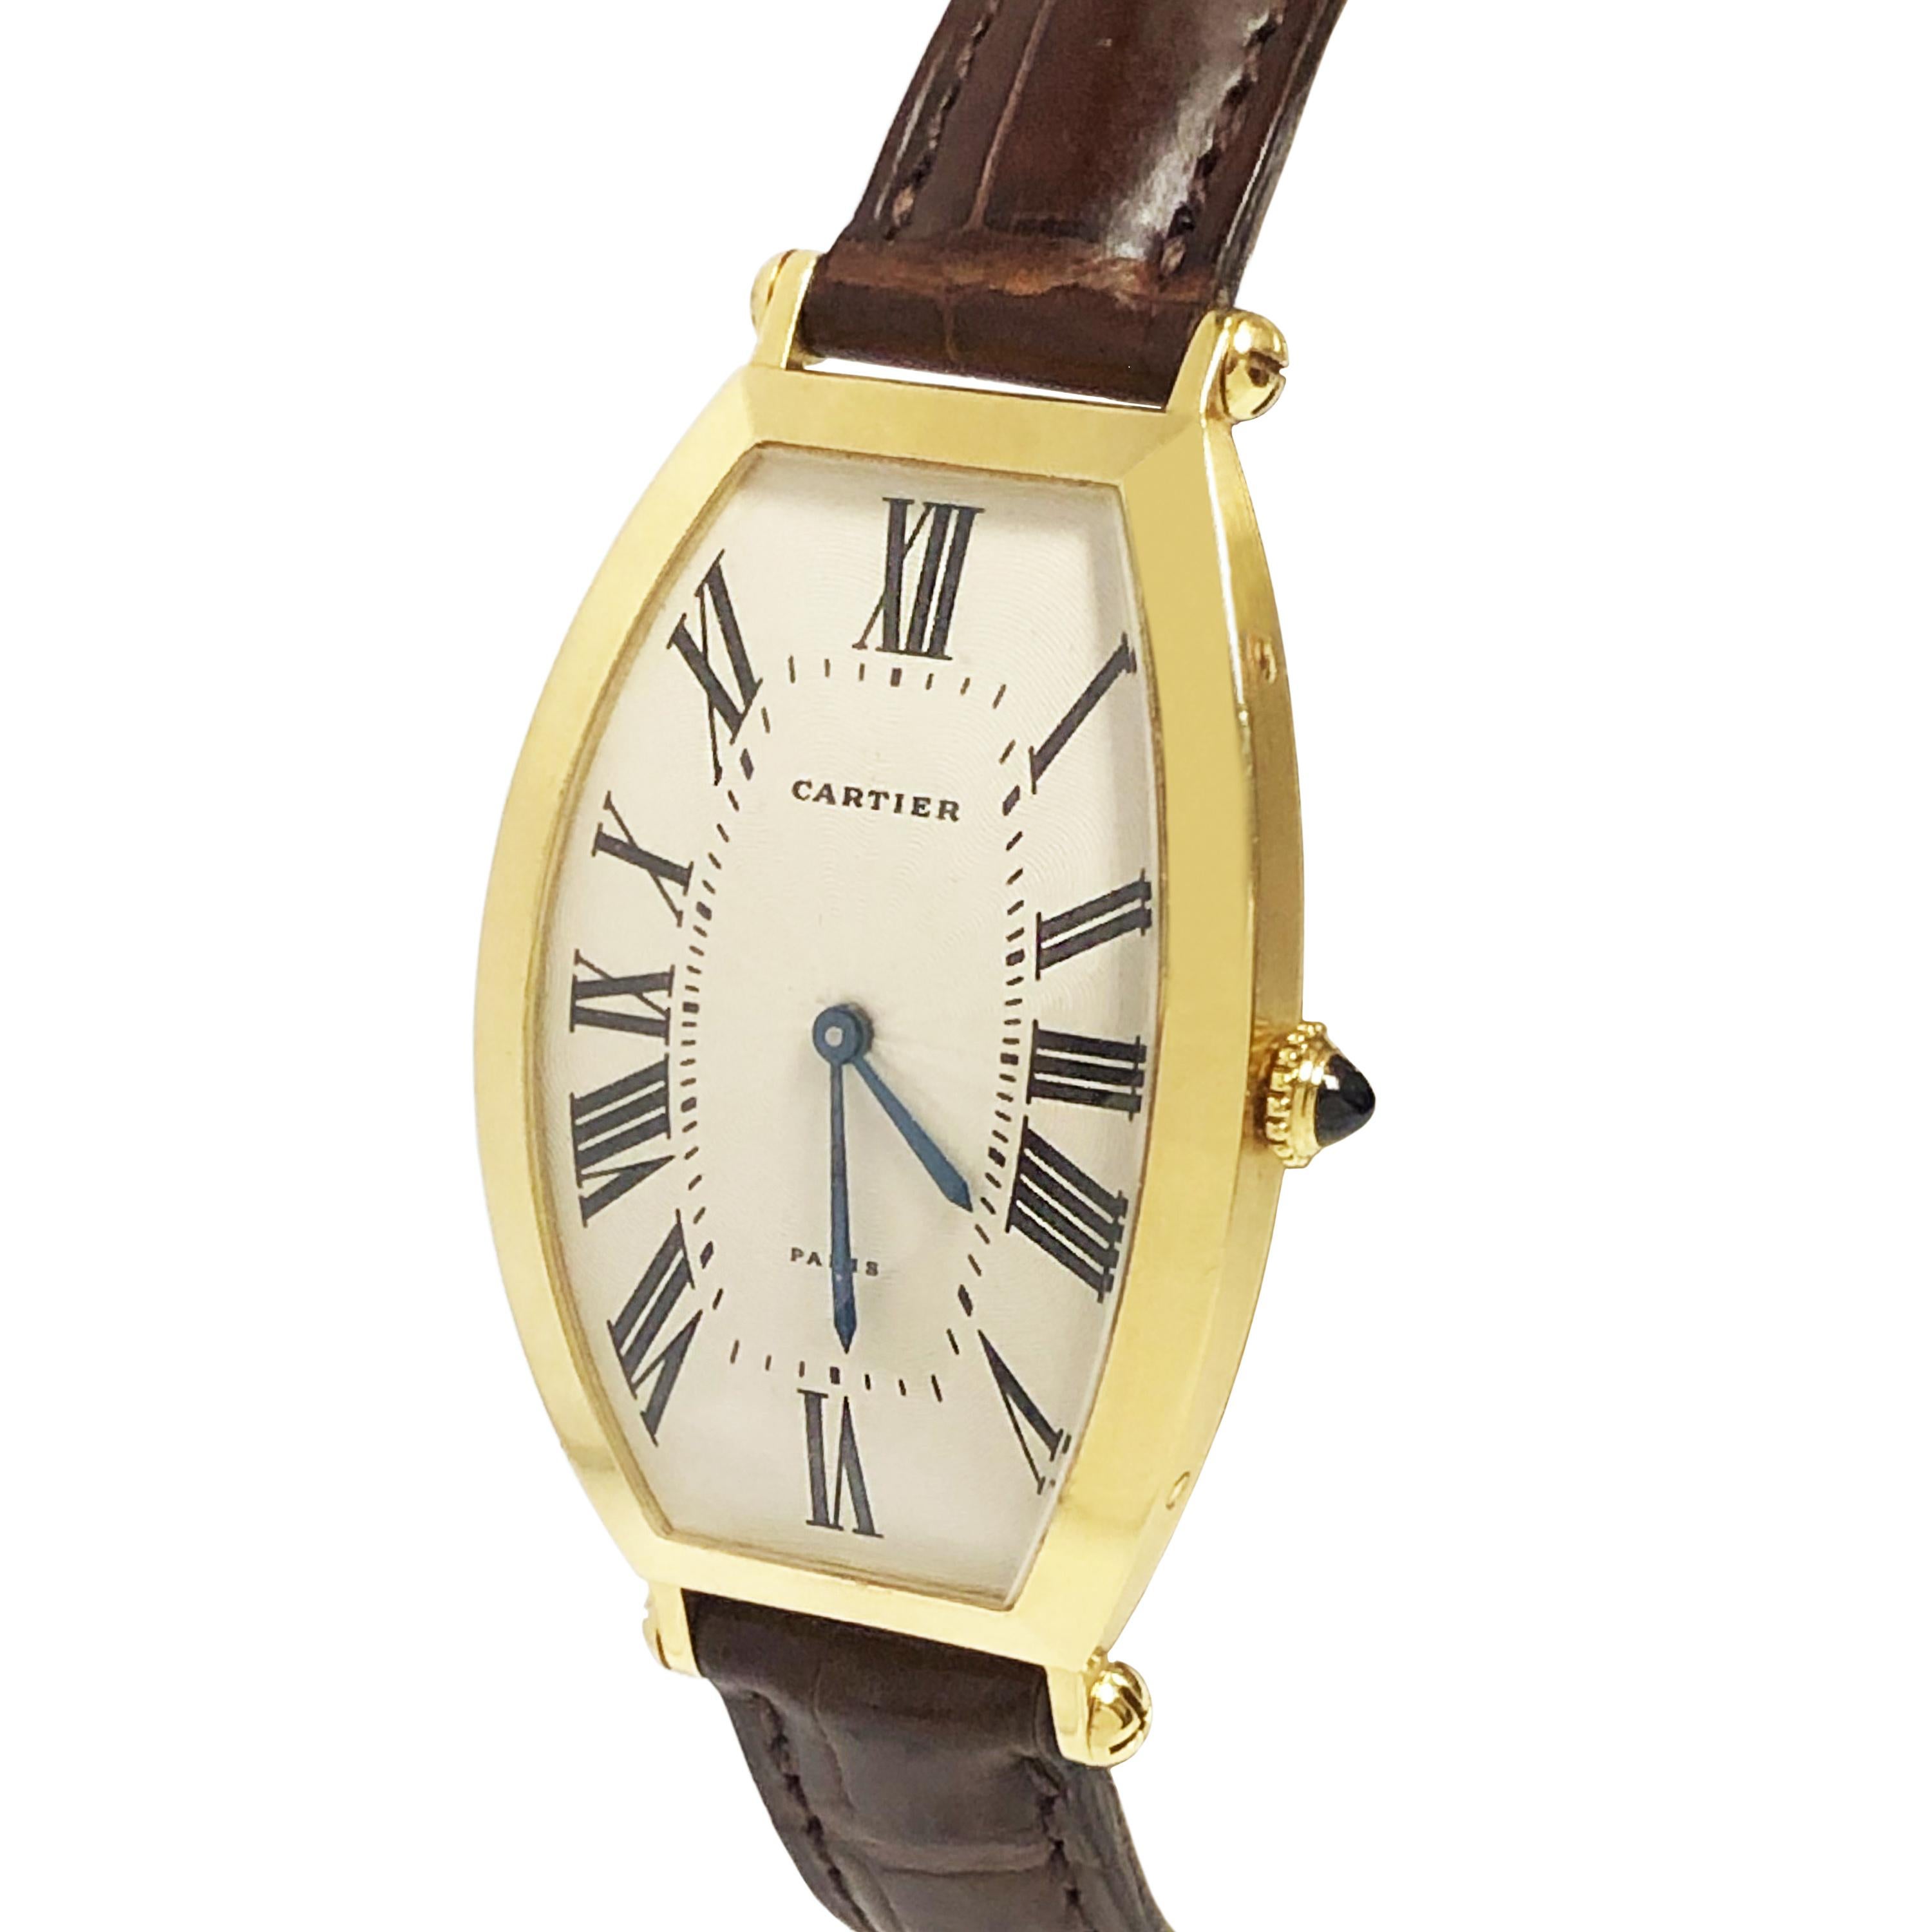 Circa late 1980 Cartier Paris Tonneau Wrist Watch, 46 X 26 Curved and Convex 18K Yellow Gold 2 Piece case. 17 Jewel Mechanical, Manual wind Movement, Sapphire Crown, Engine Turned Silver Dial with White Finish and Black Roman NUmerals. Cartier Brown